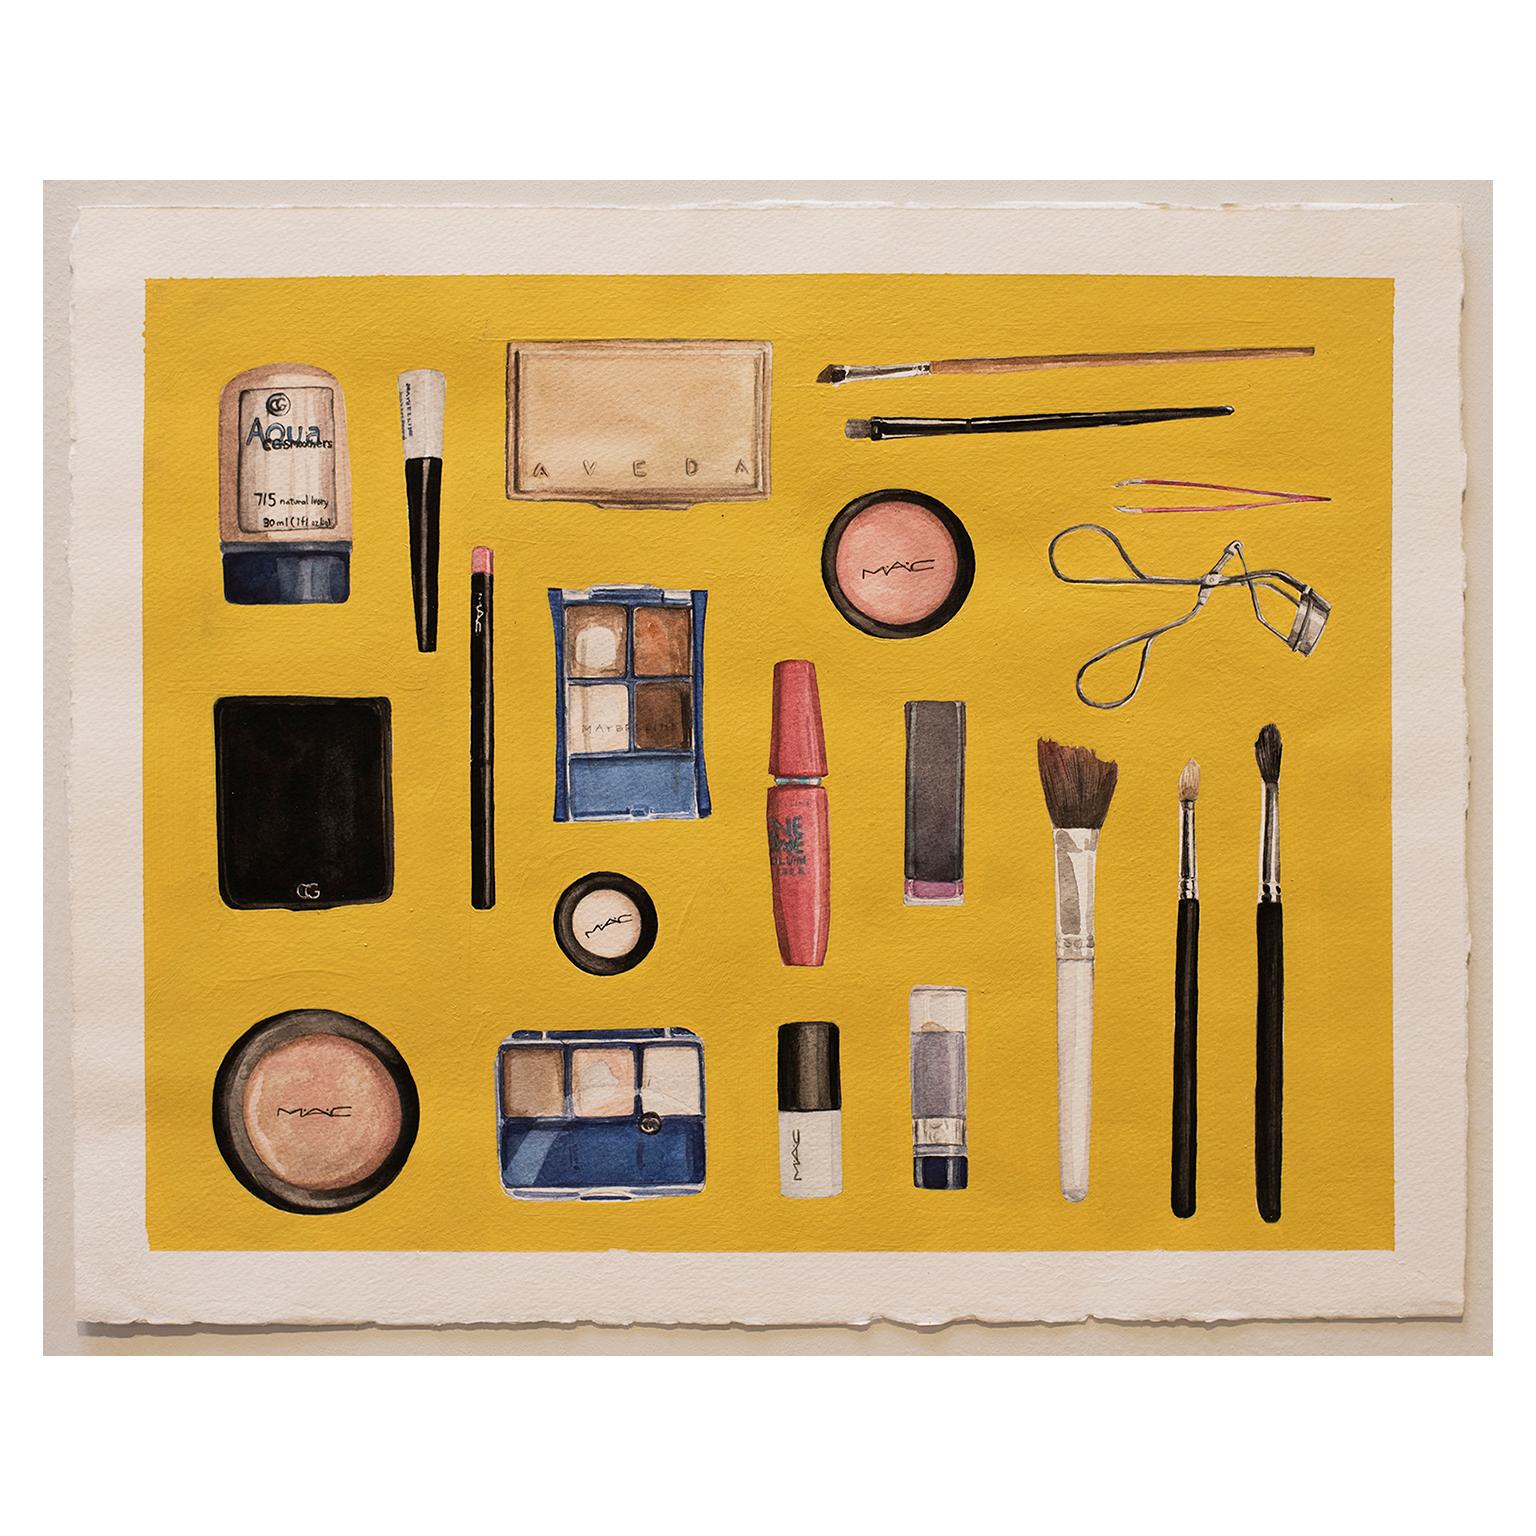 Every Beauty Product I Used Today 3 by Courtney Miles
Watercolor, acrylic and graphite on paper
16 x 20 inches Unframed
Representation of everyday objects.  Bright yellow background.

Courtney Miles’ artwork observes all of us through the lens of